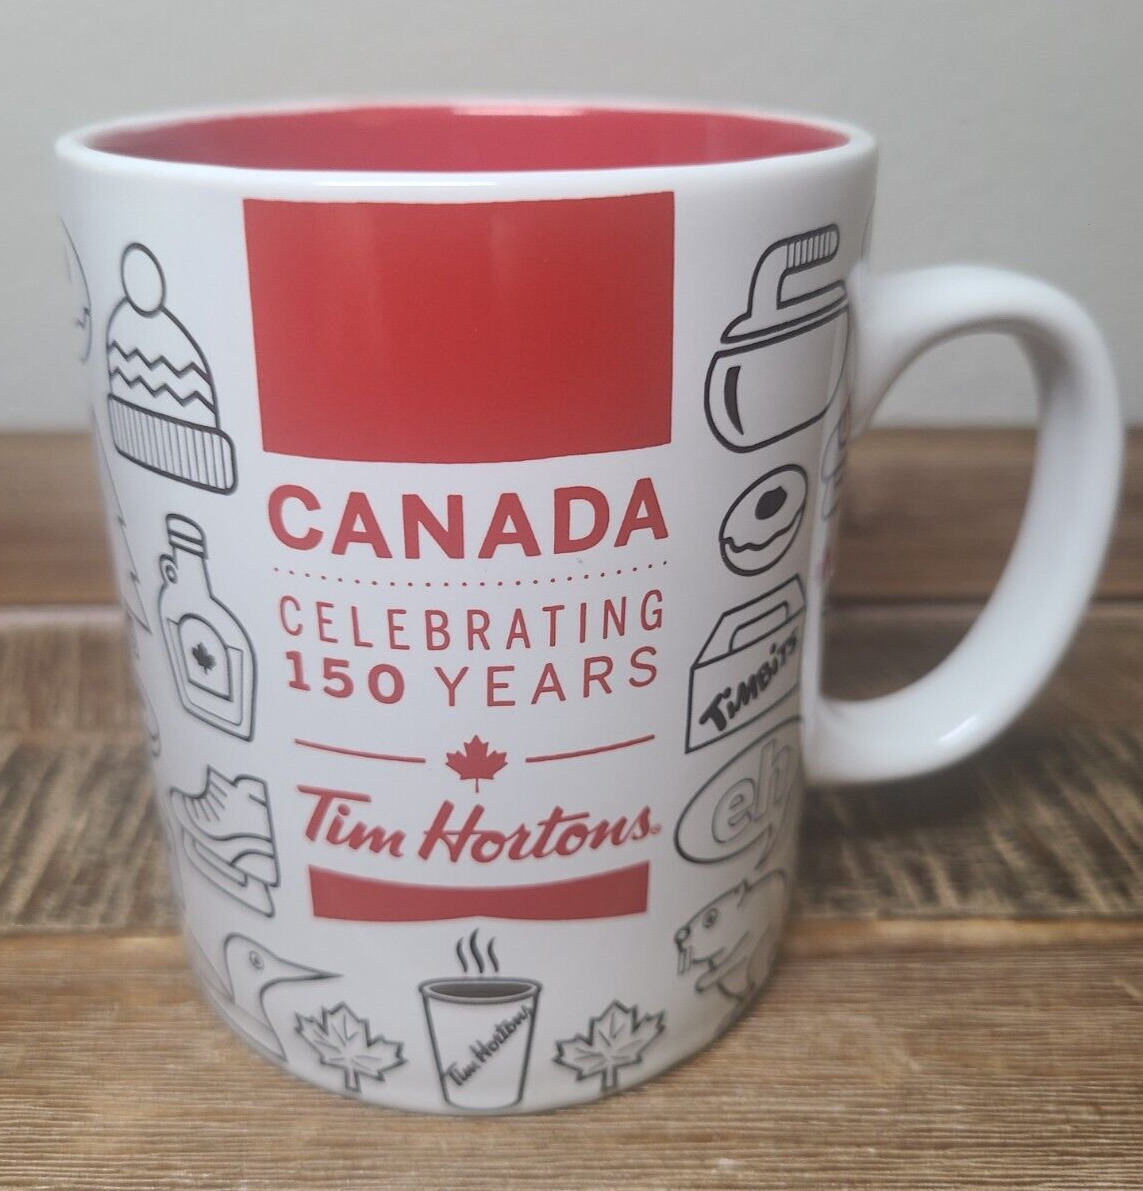 2017 Limited Edition Tim Hortons Canada Celebrating 150 Years Coffee Cup Mug